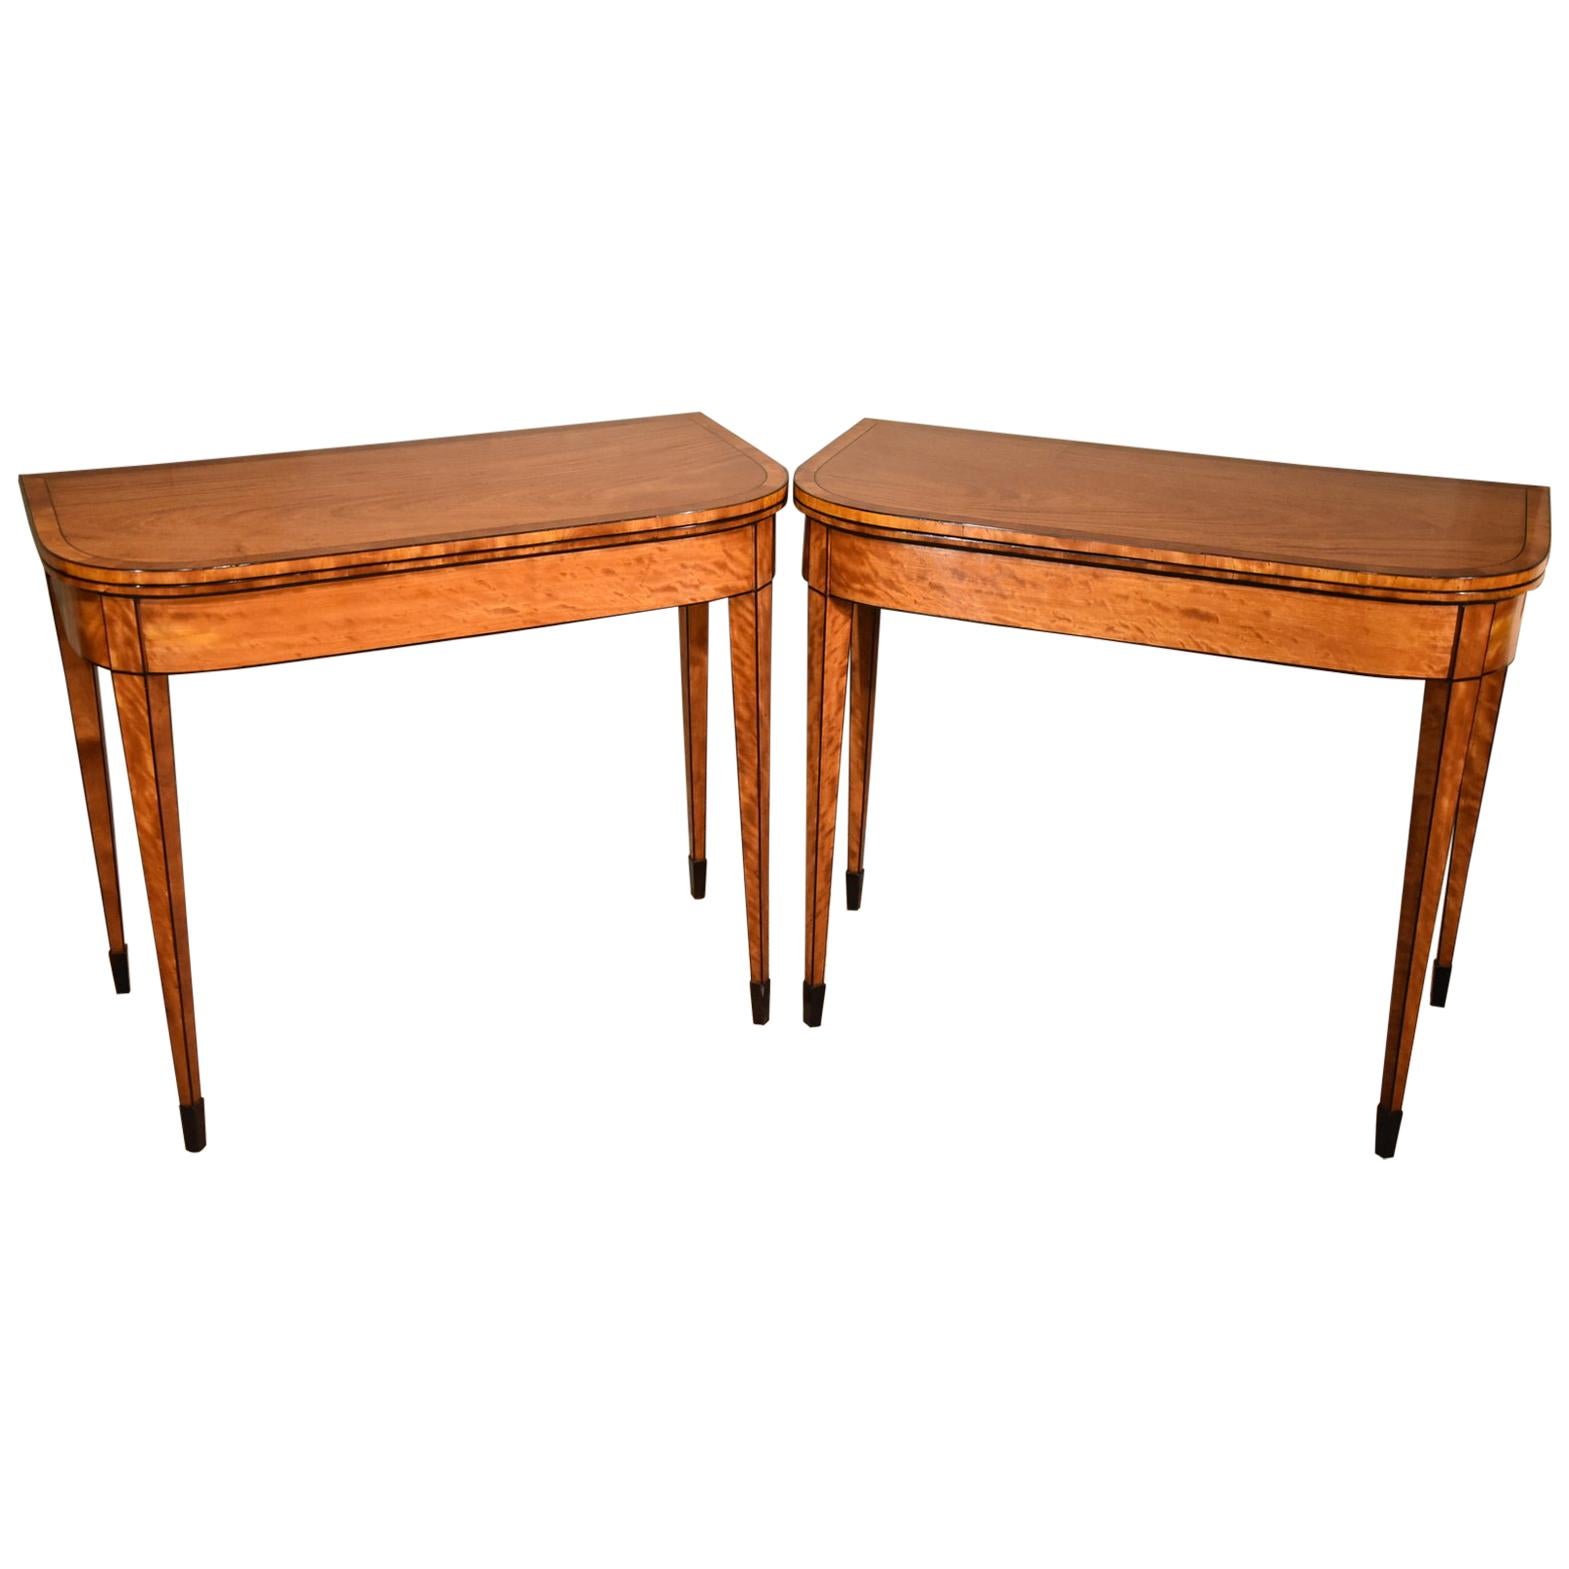 Fine Pair of Late 18th Century Satinwood Card Table For Sale